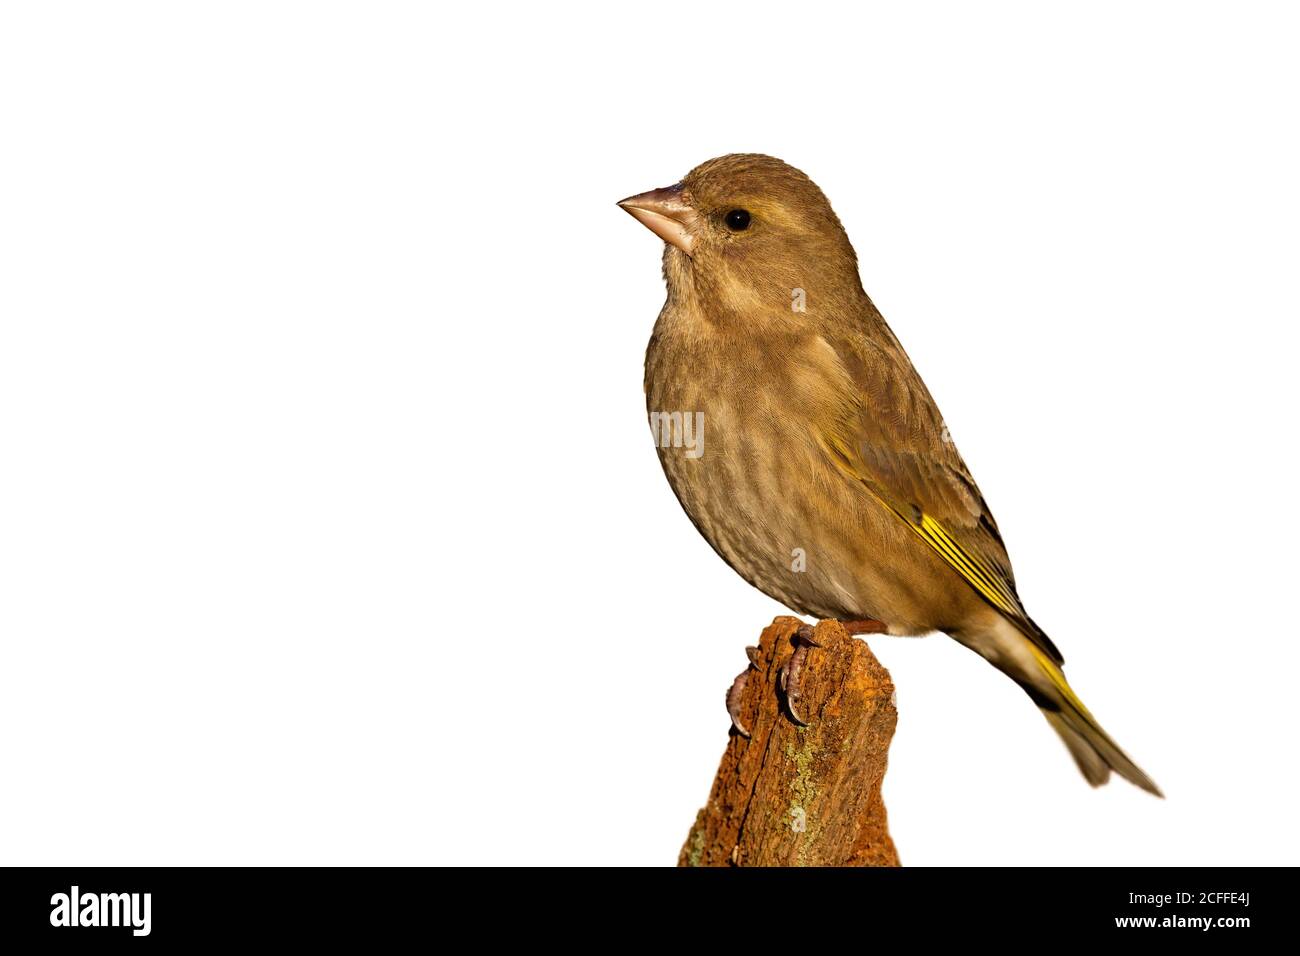 Female european greenfinch sitting on branch isolated on white background. Stock Photo